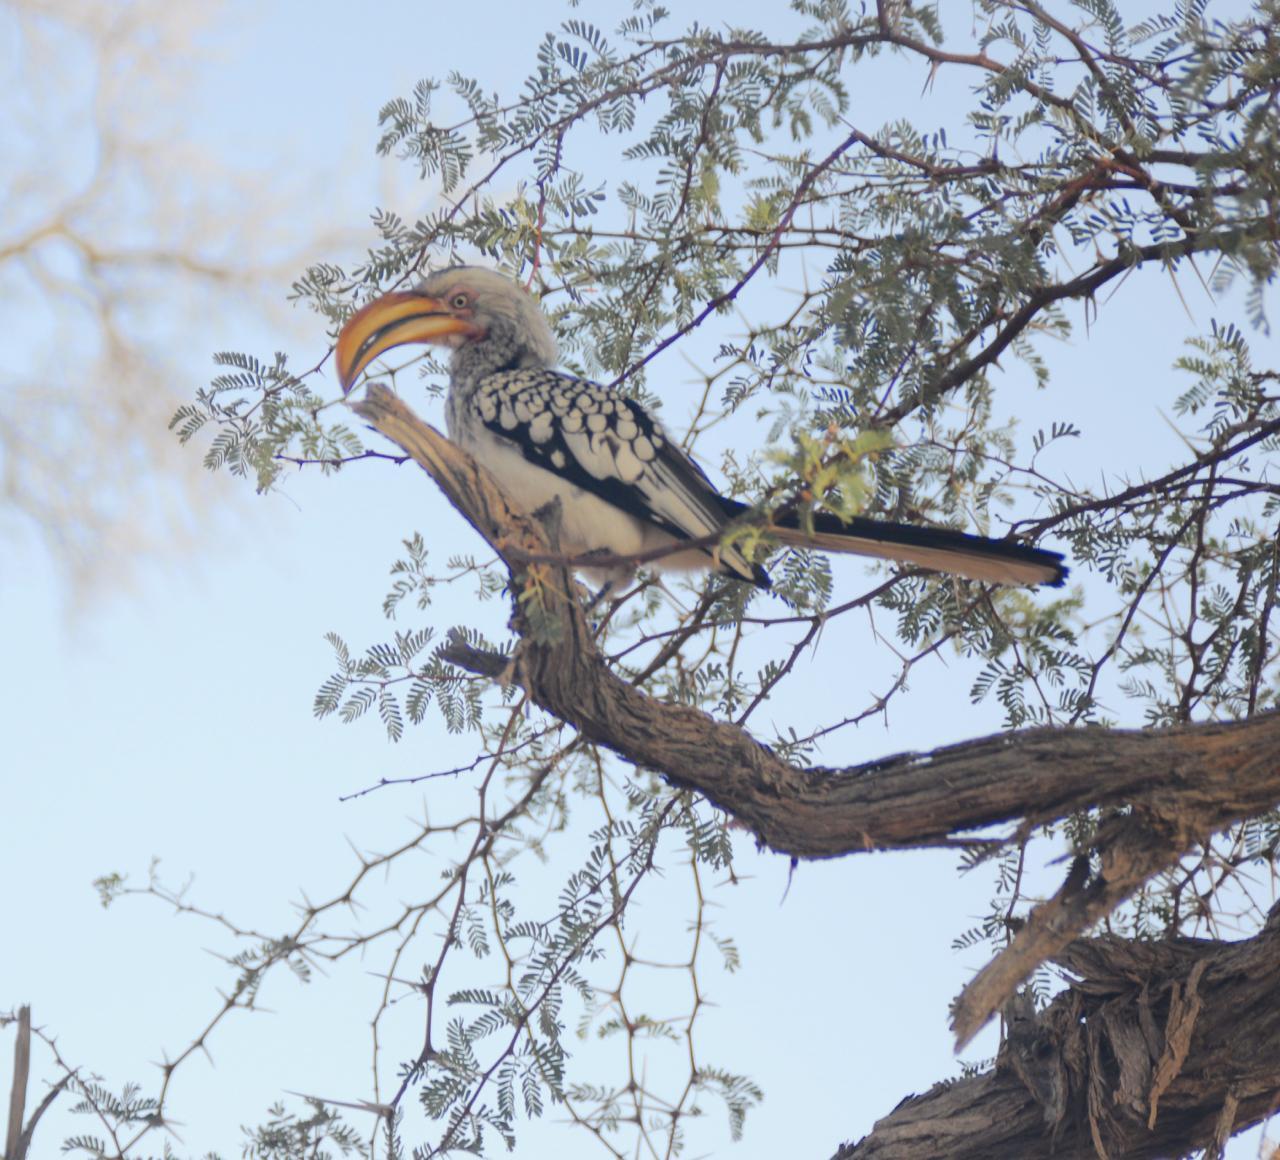 Southern Yellow-billed Hornbill Photo by Brian Avent